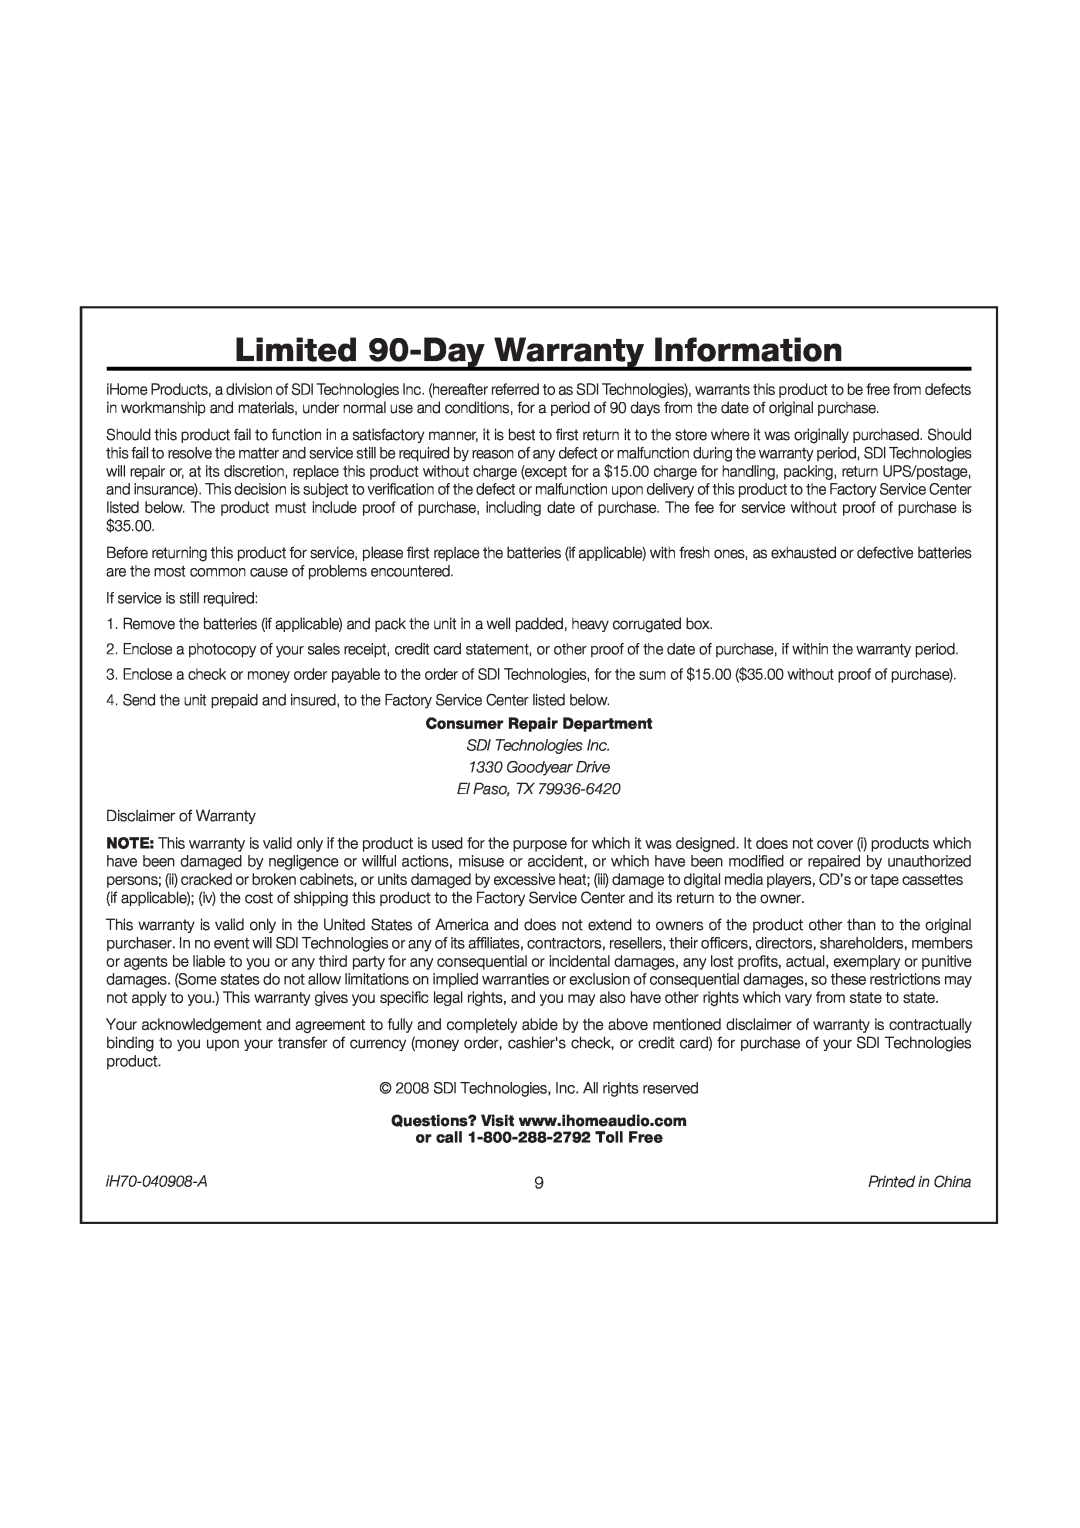 iHome Limited 90-Day Warranty Information, If service is still required, Consumer Repair Department, iH70-040908-A 